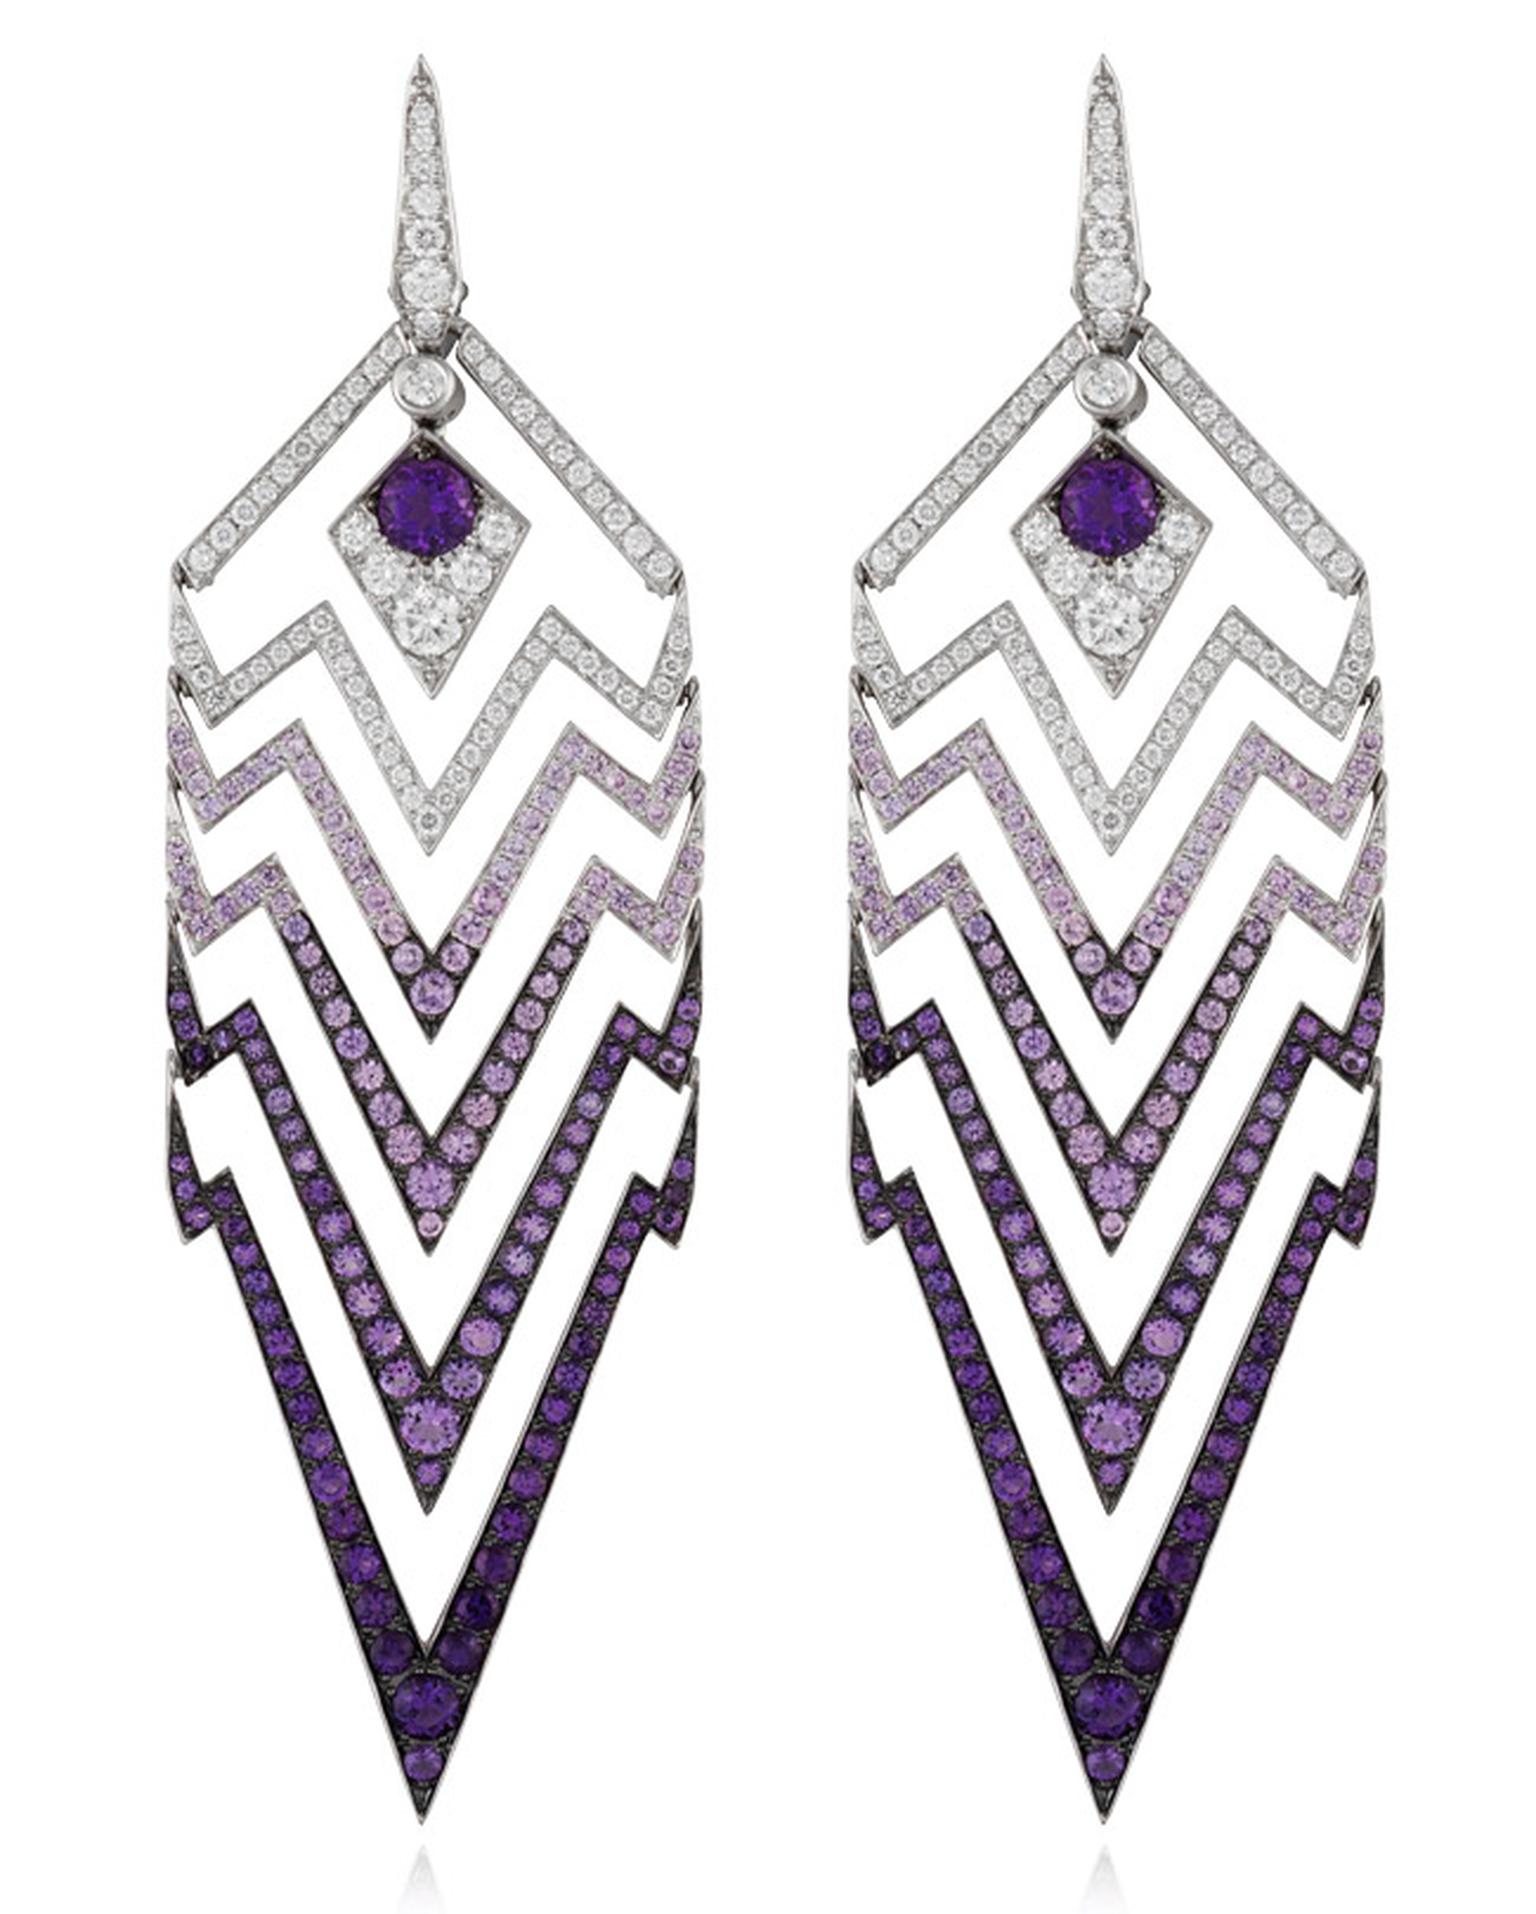 Stephen Webster Lady Stardust chandelier earrings in white gold featuring geometric zigzags with white diamonds turning into ever deepening purple amethysts for a dramatic dip-dye effect.